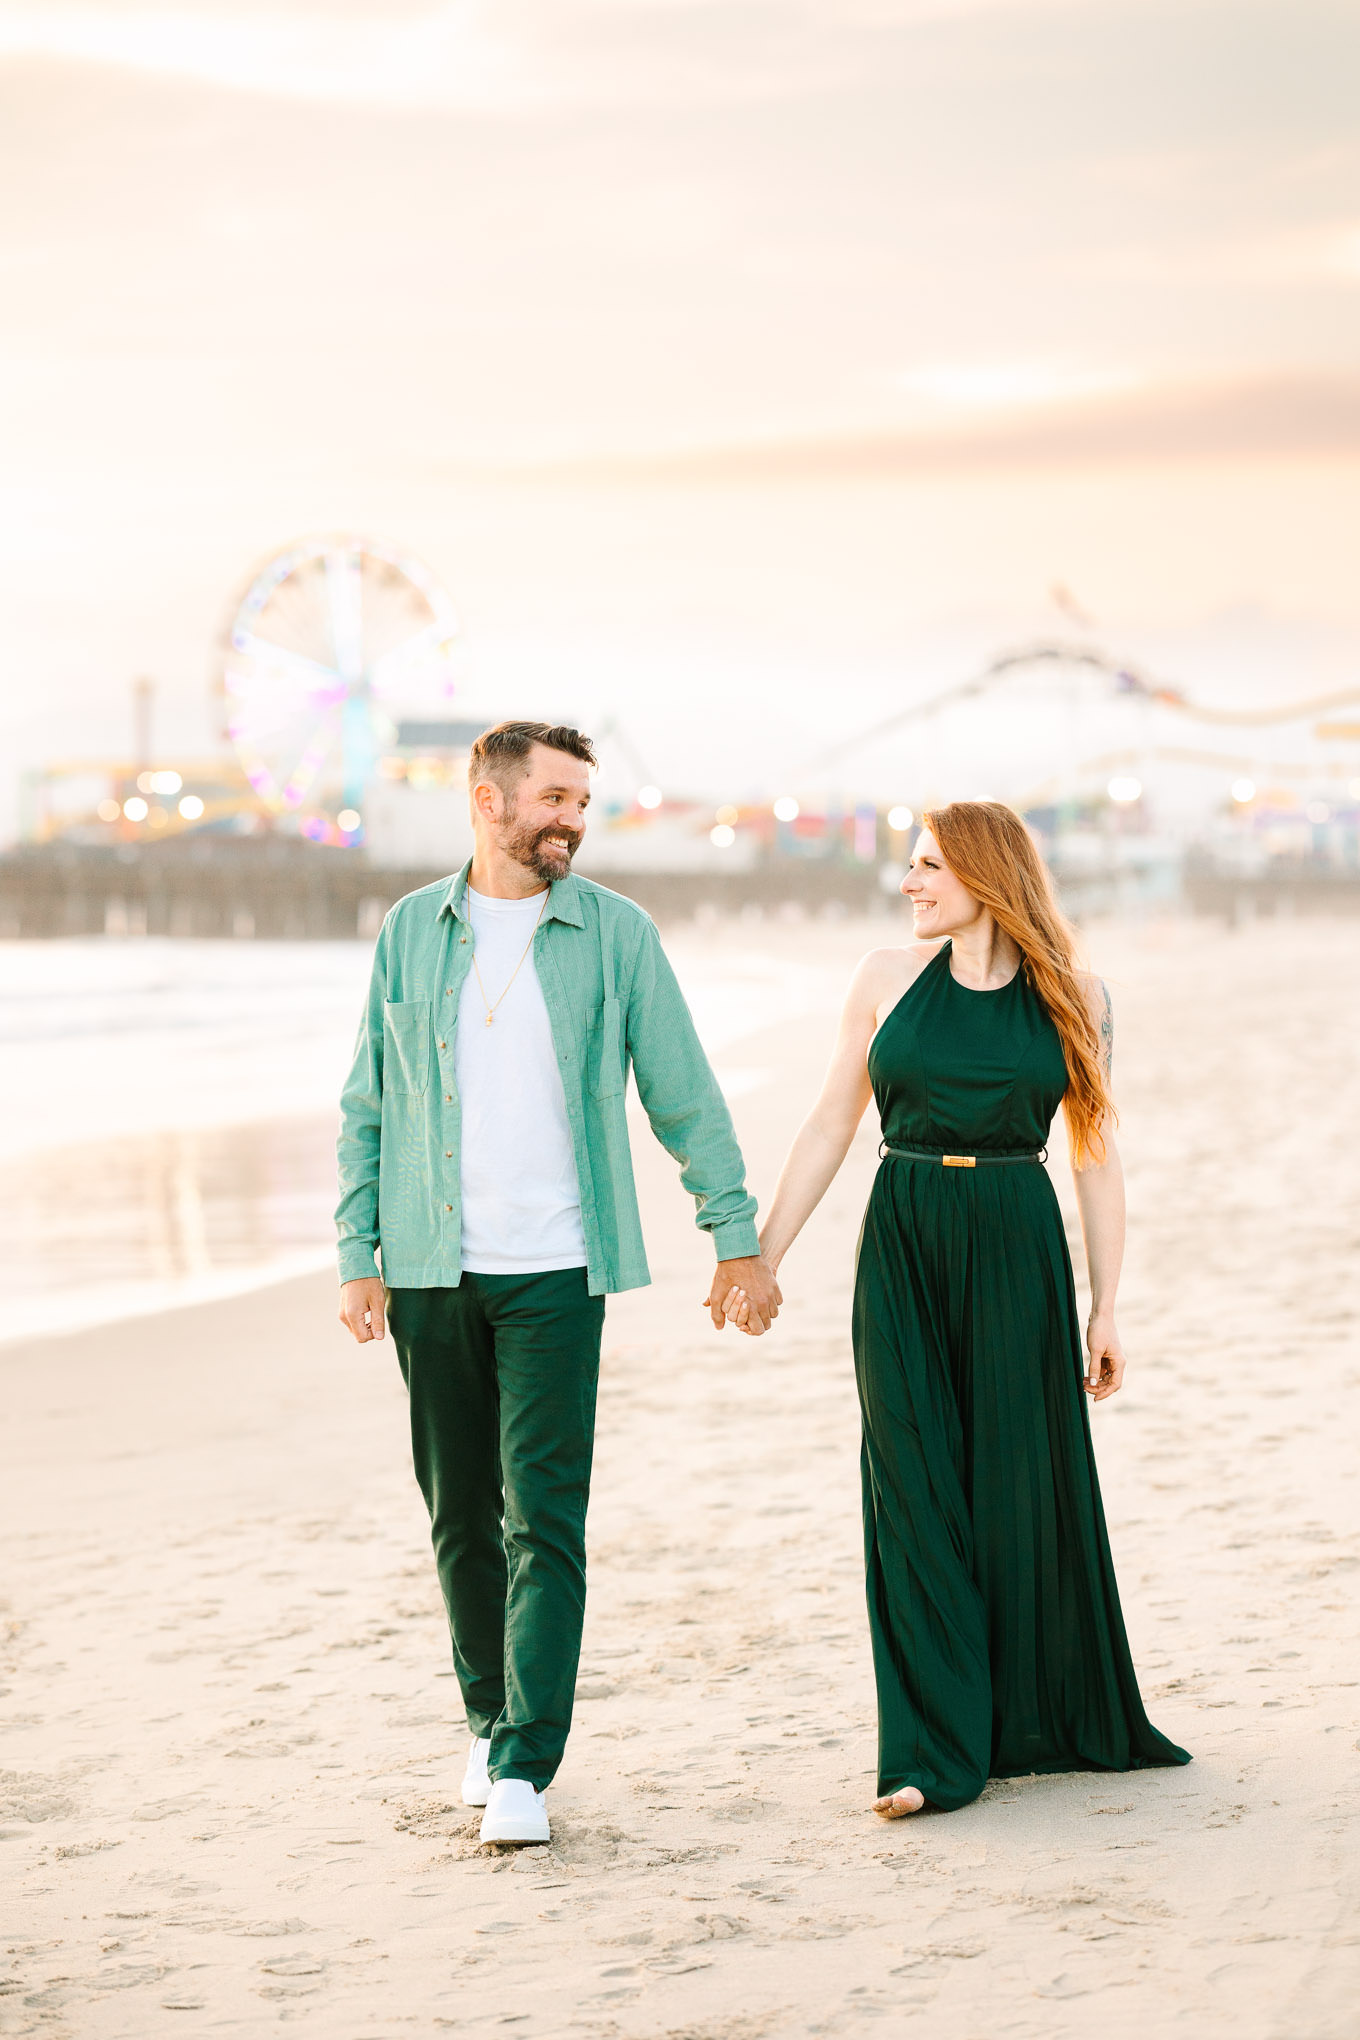 Santa Monica pier engagement session | Wedding and elopement photography roundup | Los Angeles and Palm Springs photographer | #losangeleswedding #palmspringswedding #elopementphotographer Source: Mary Costa Photography | Los Angeles